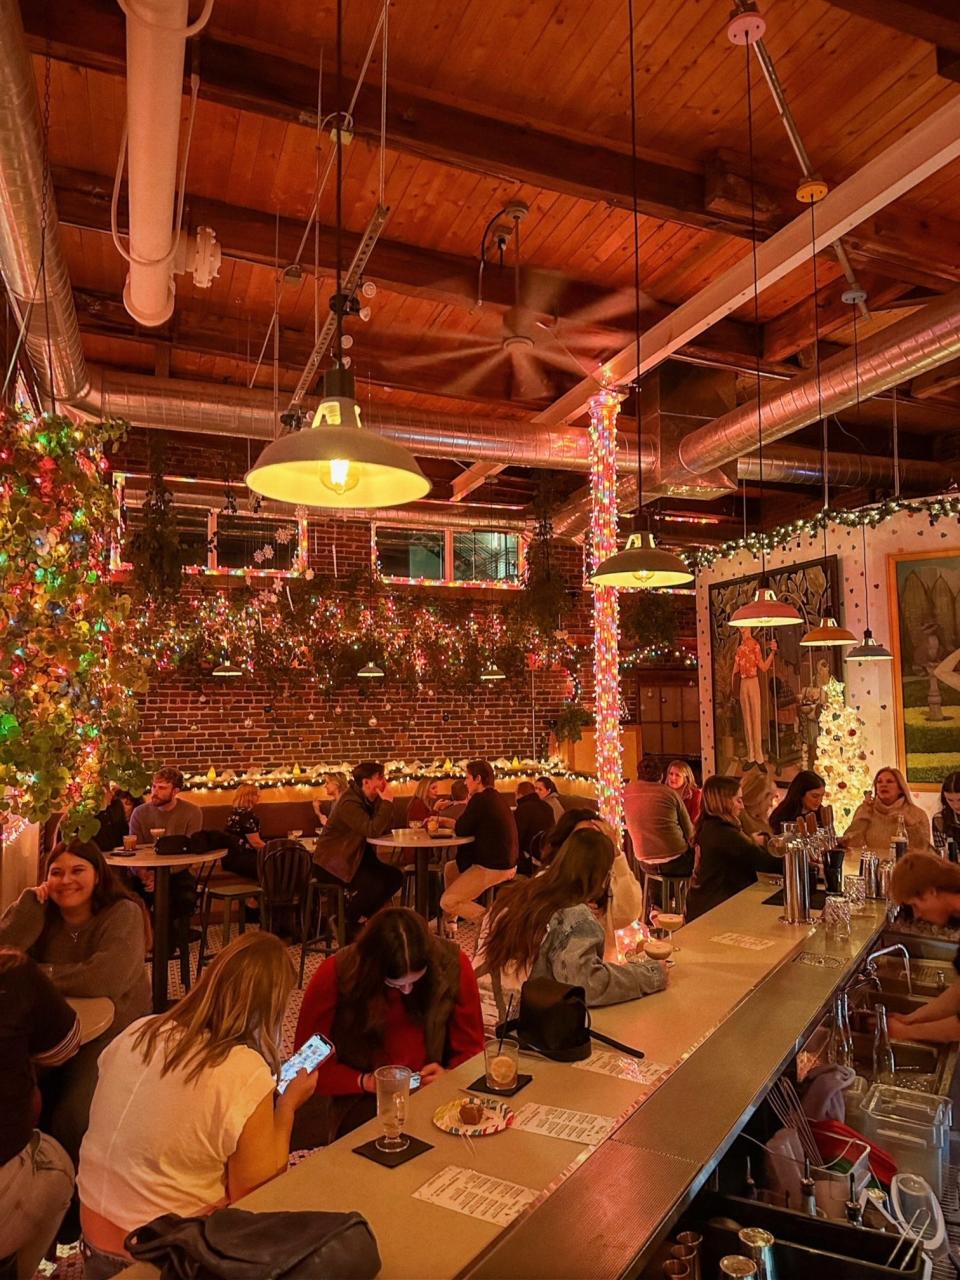 Visit the Nice List, a holiday-themed pop-up bar at Secret Admirer in Des Moines.